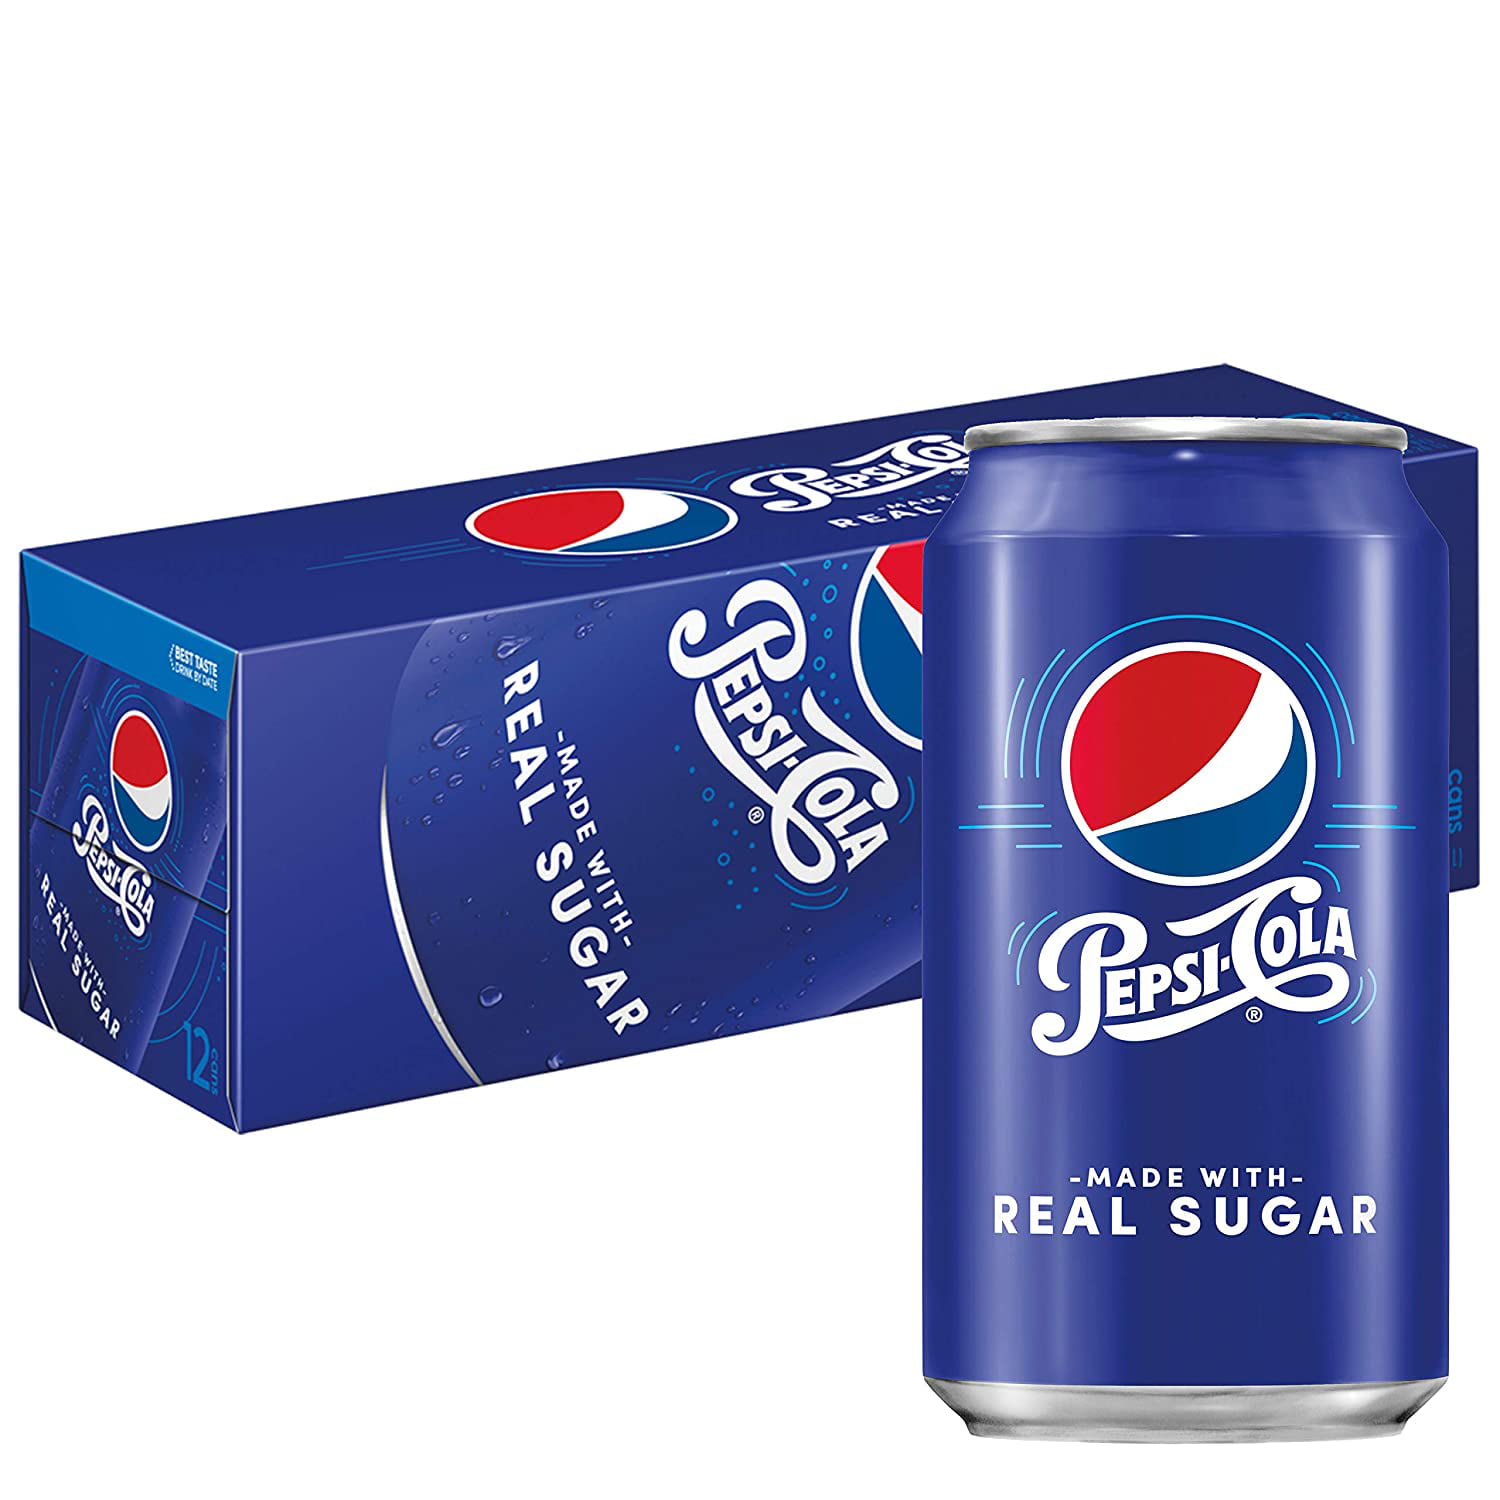 Pepsi Cola Made with Real Sugar Soda Pop, 12 oz , 12 Pack Cans